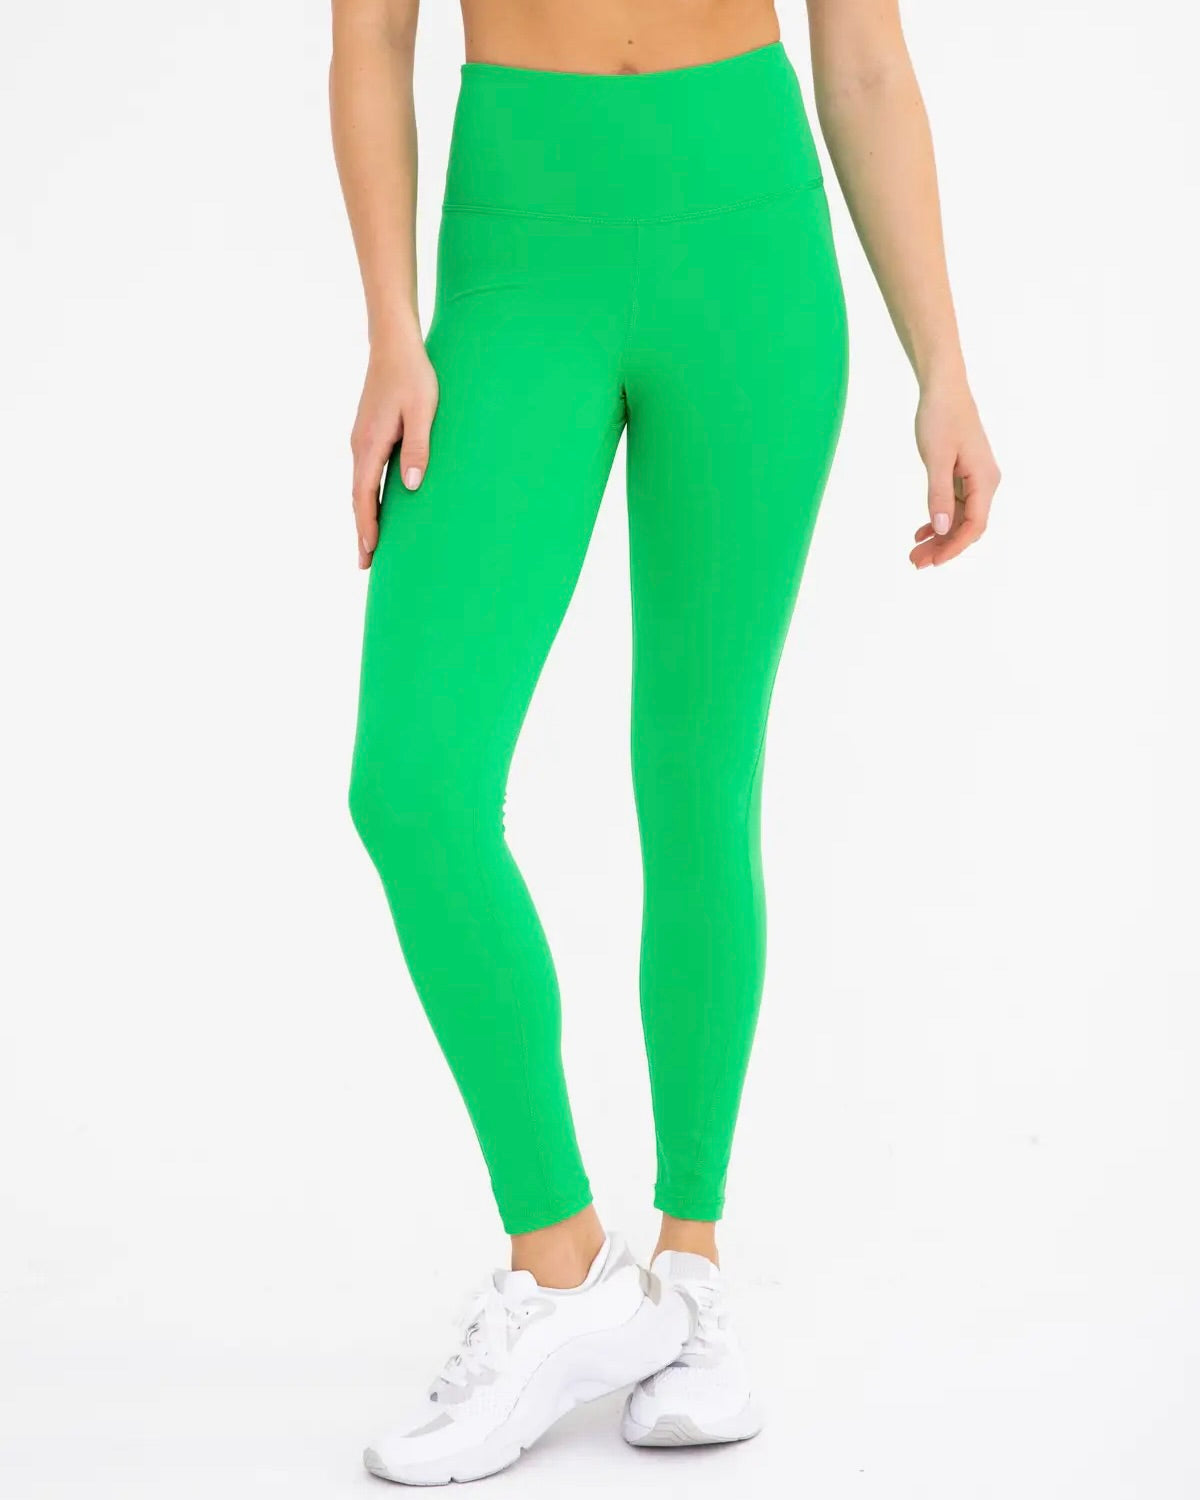 Model only showing legs wearing apple green leggings wearing white sneakers on a white background 